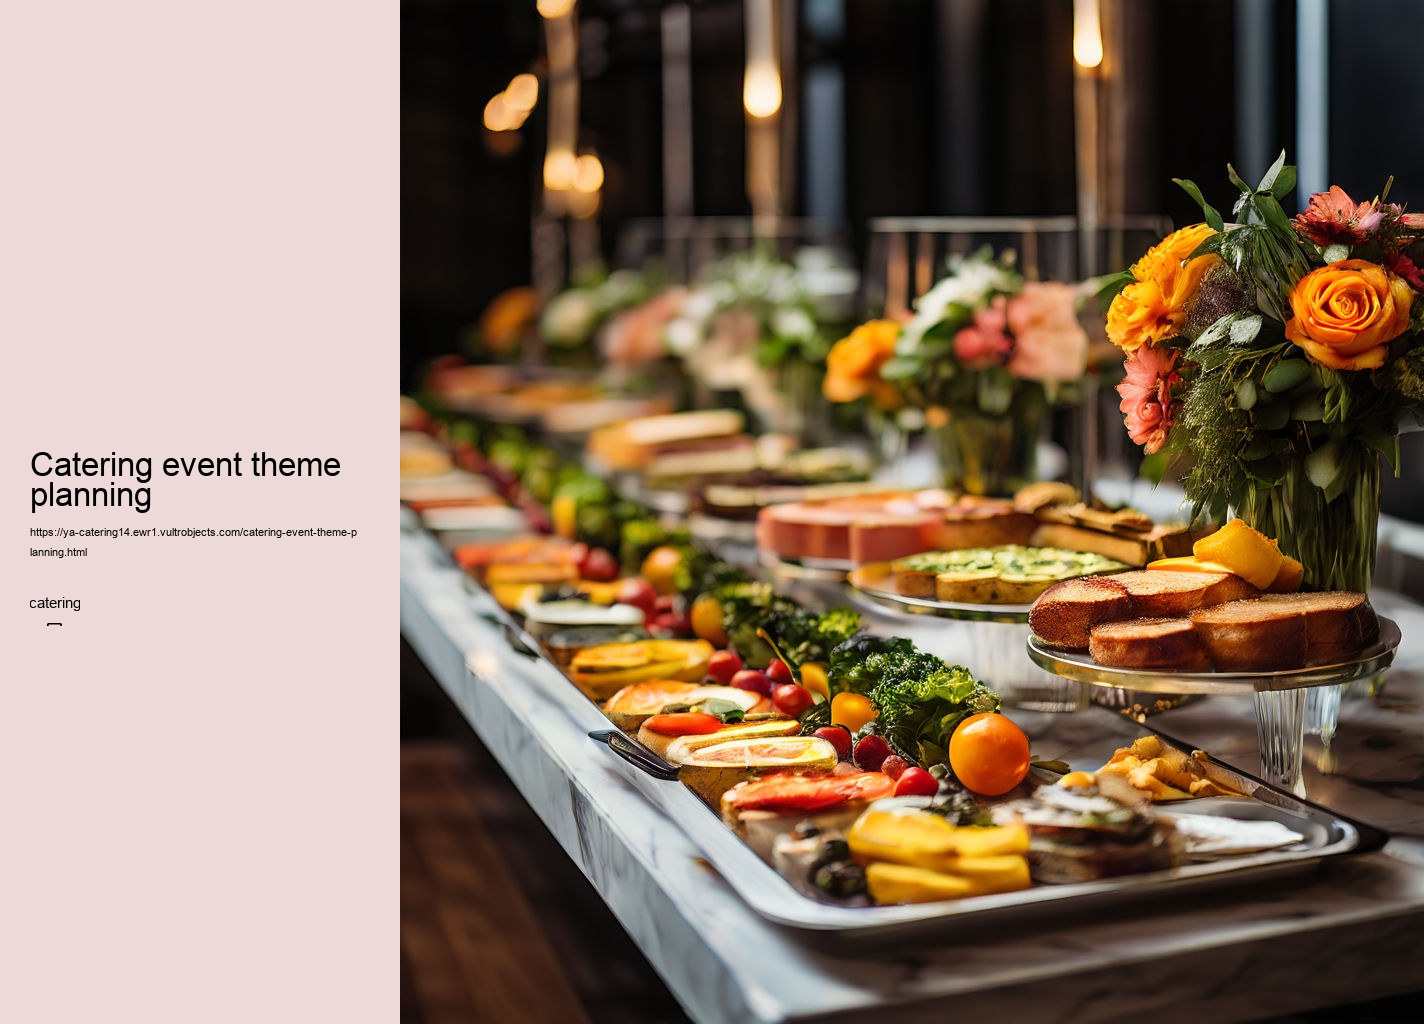 Catering event theme planning